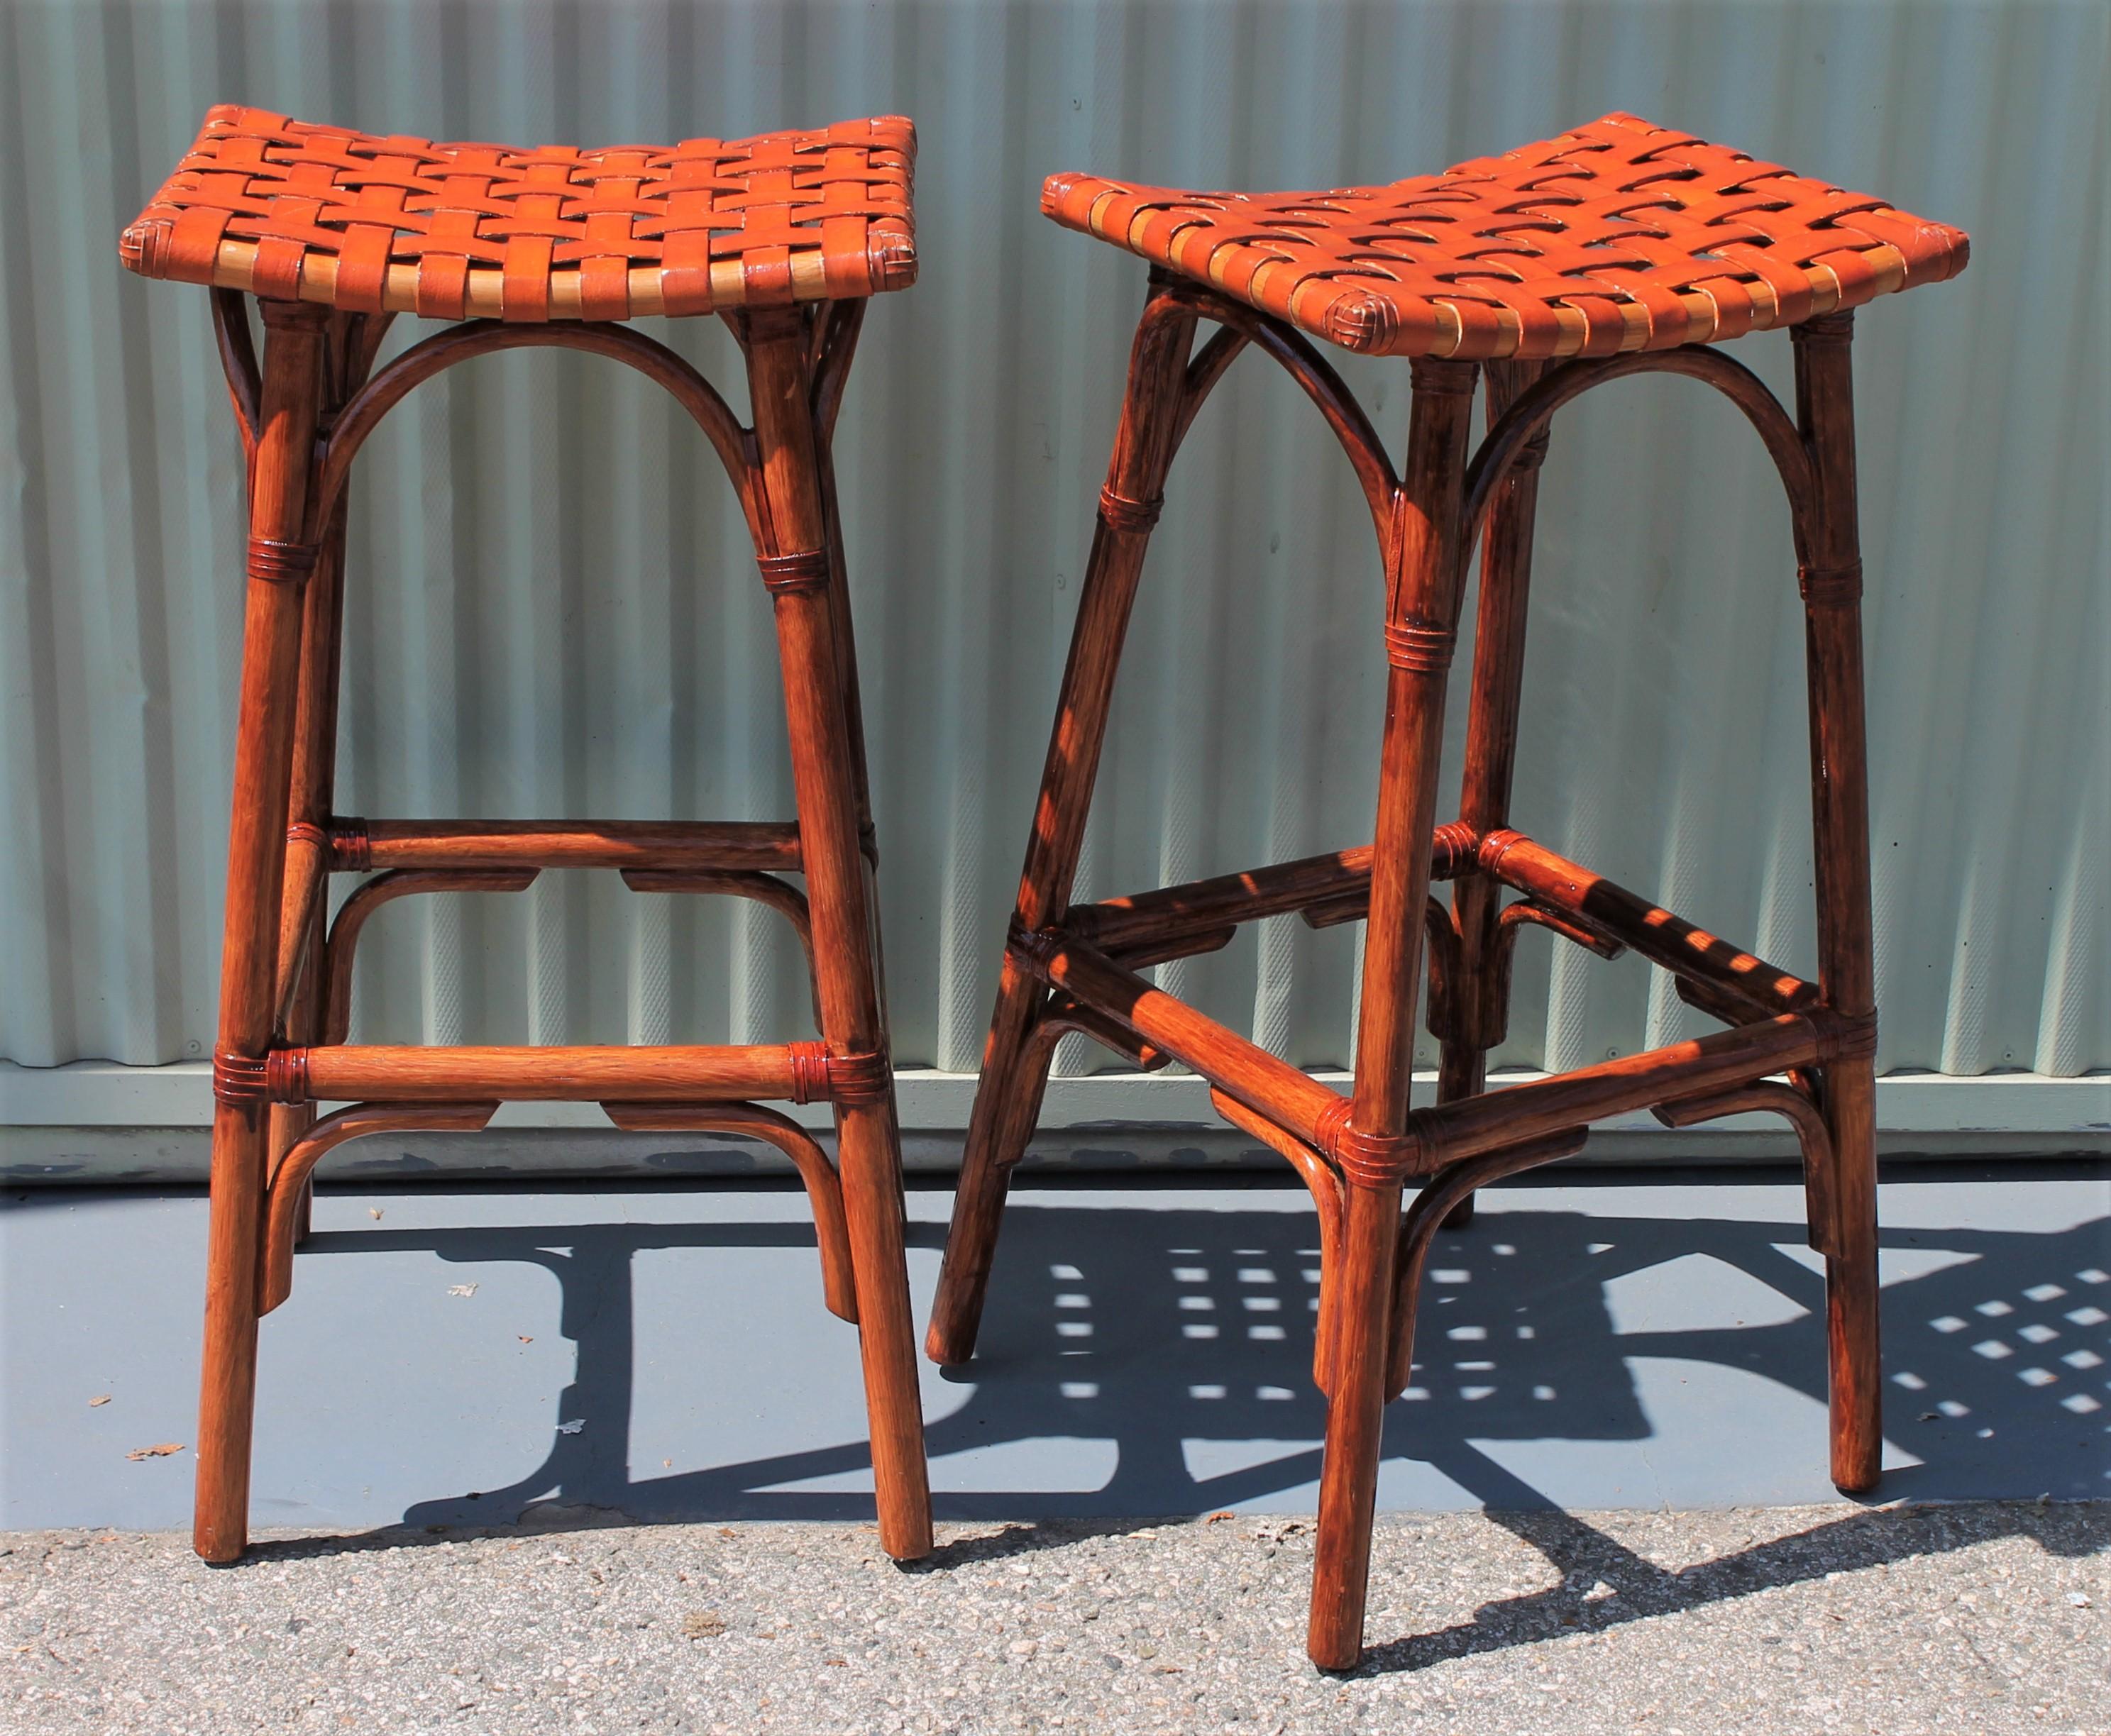 This pair of bamboo bar stools are in good condition and very sturdy.